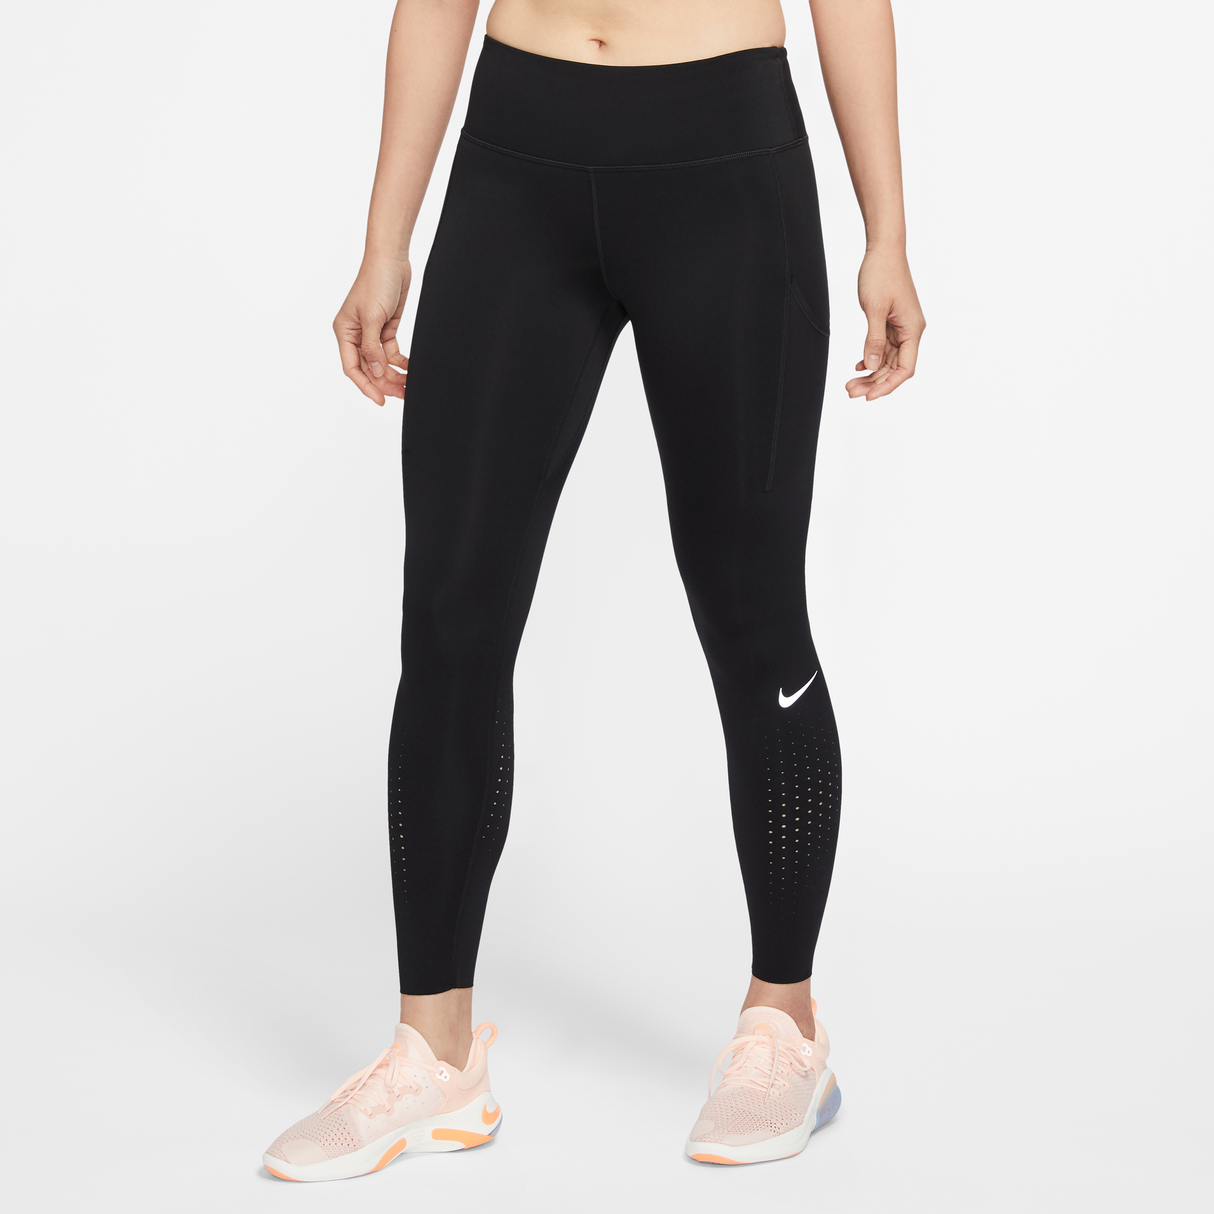 Nike Epic Lux Running Tights Fit Black Mid Rise CN8041-010 Womens XS Black